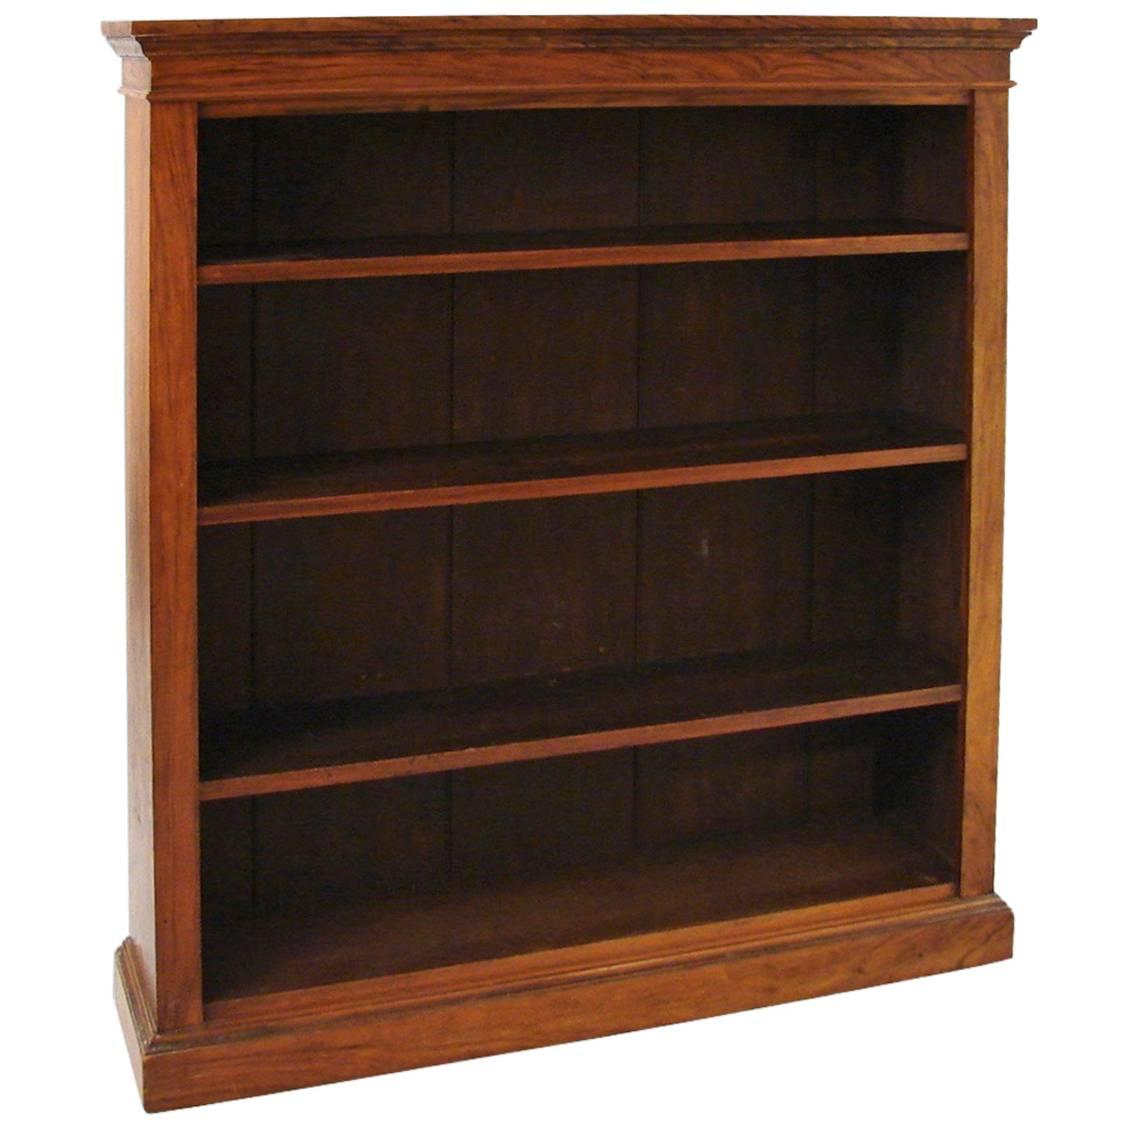 English Rosewood Open Bookcase with Adjustable Shelves